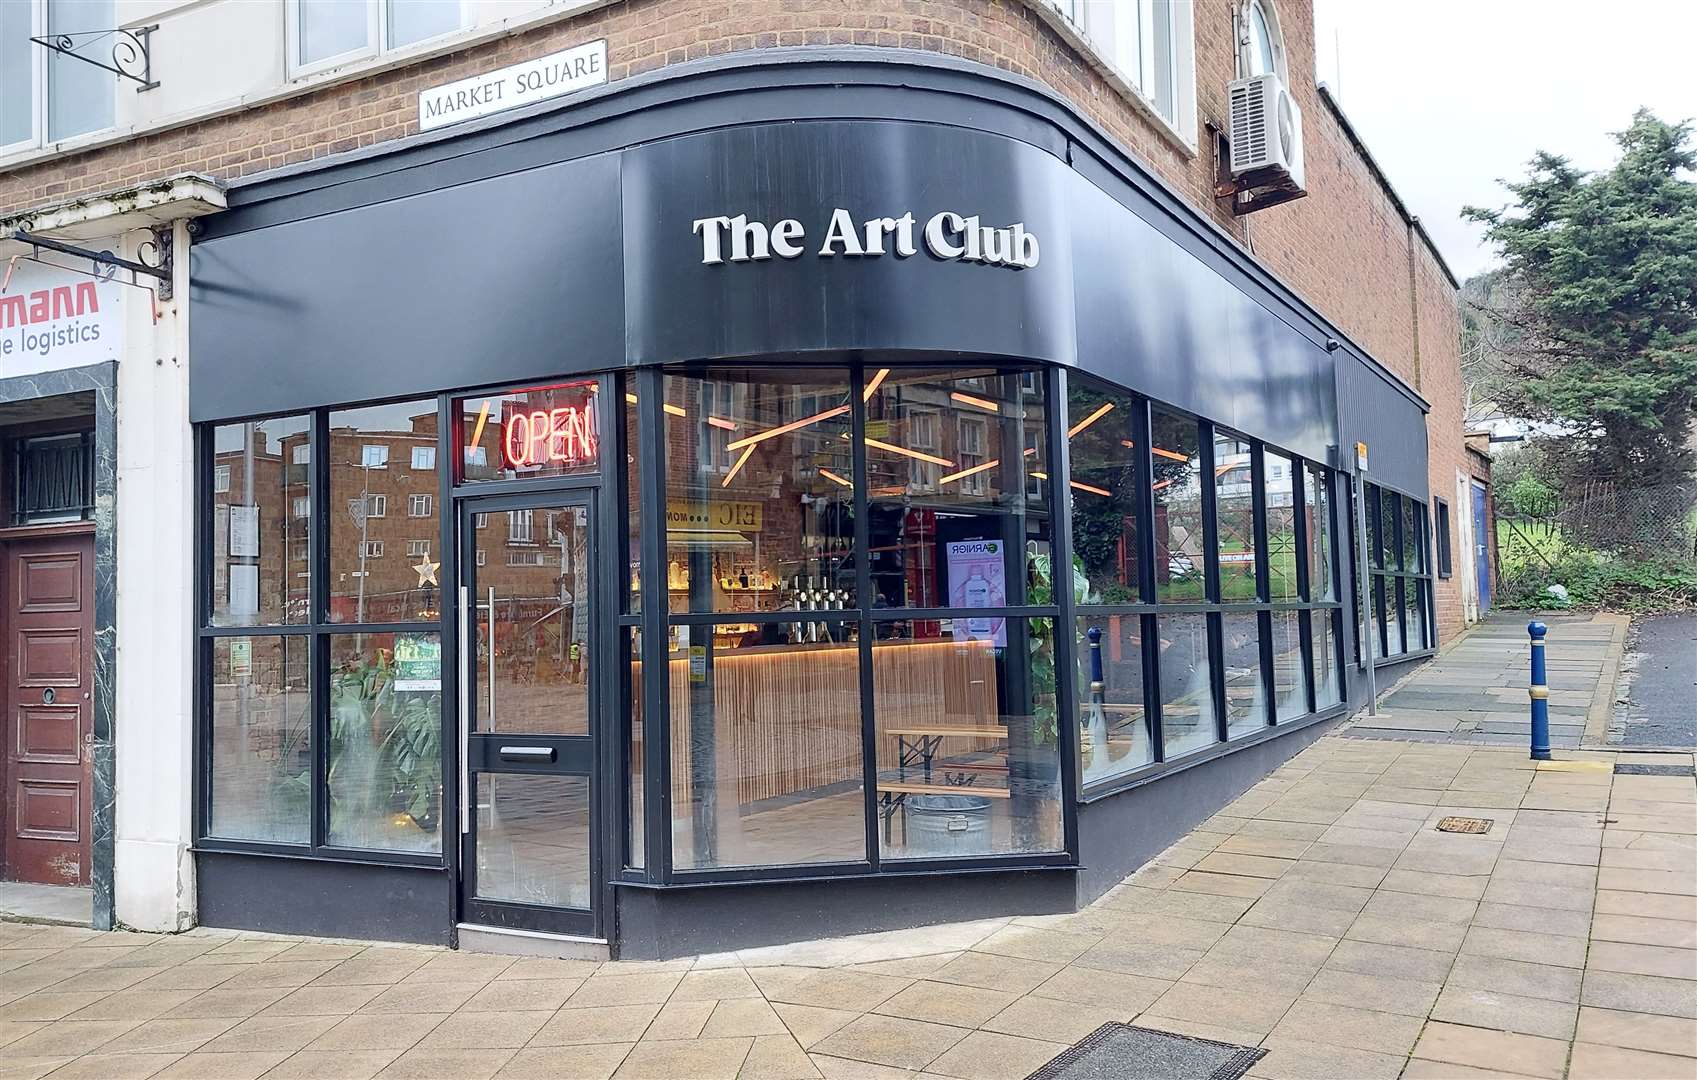 New music venue, The Art Club is in Dover's Market Square